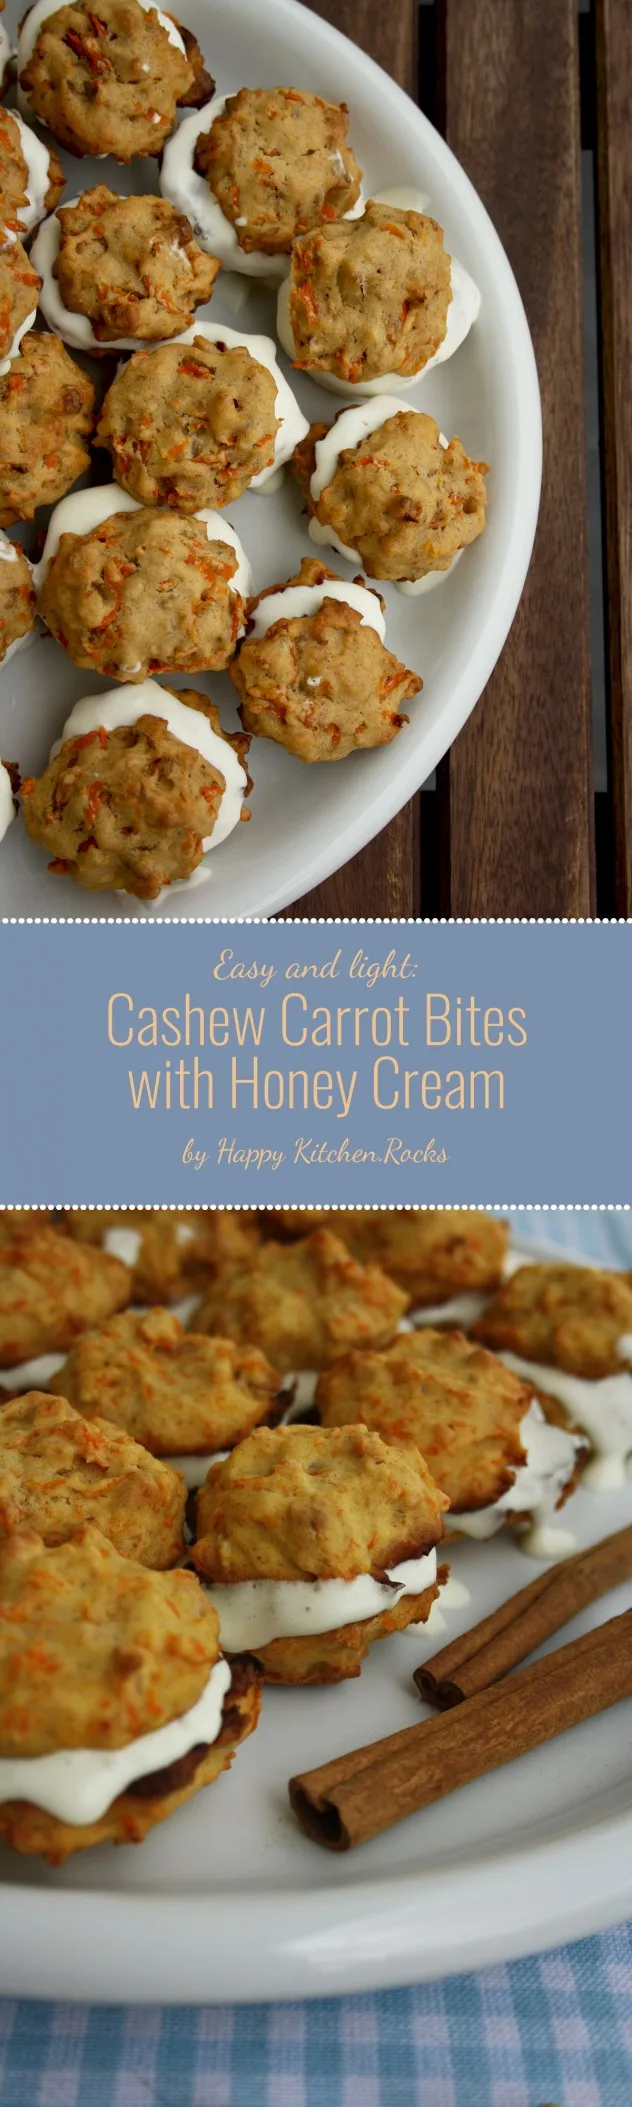 Cashew Carrot Bites with Honey Cream. Easy-to-make and ingenious dessert, moist, flavorful and yummy. It's much lighter than a carrot cake! A must try recipe